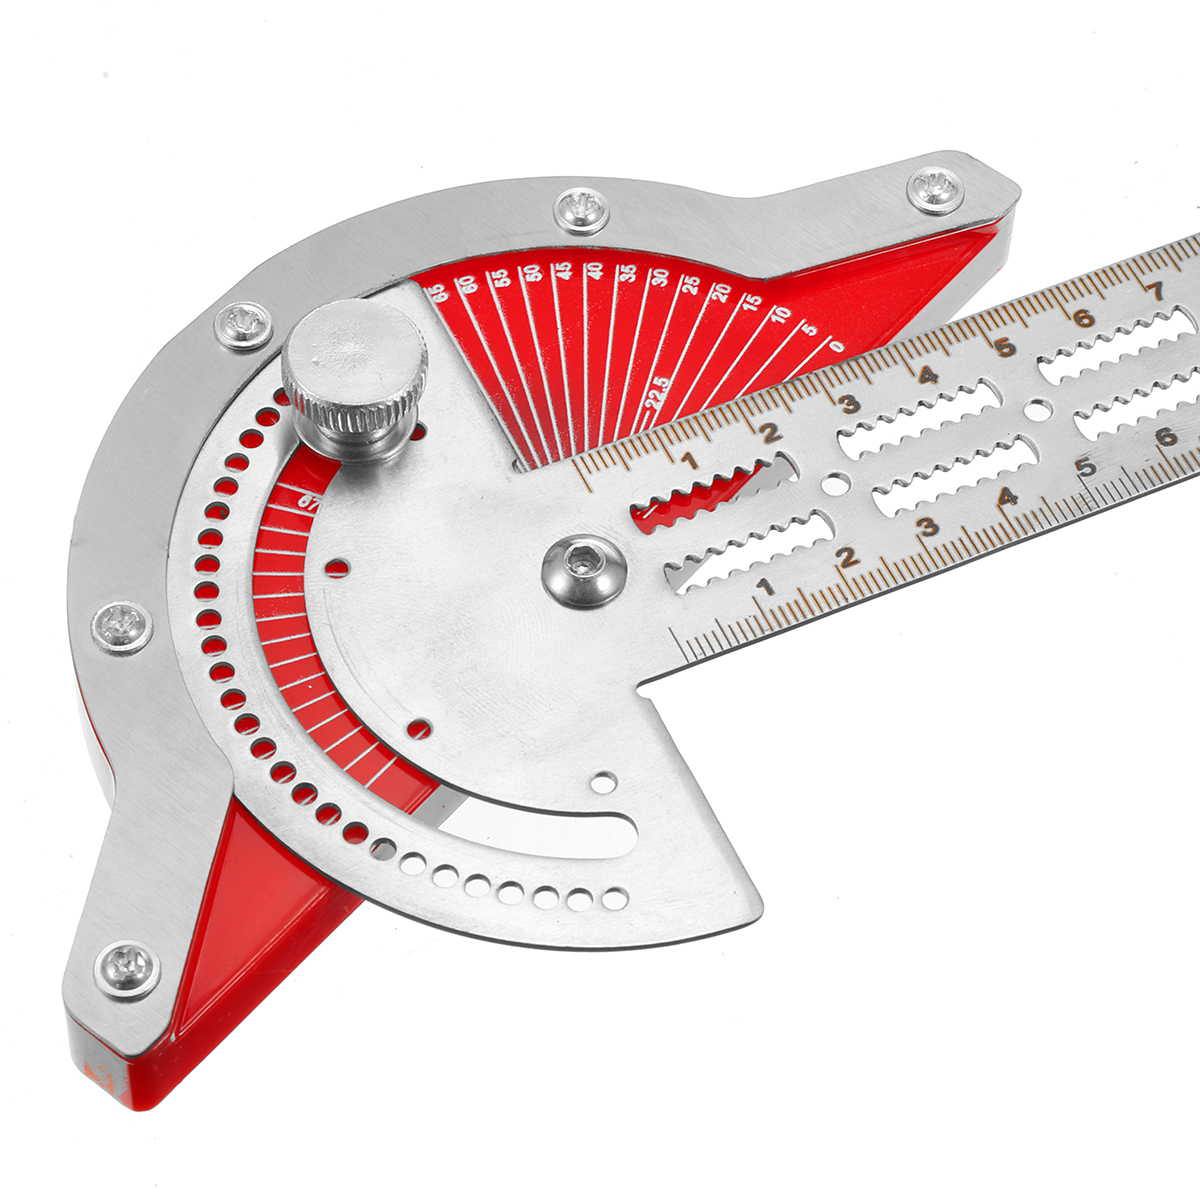 Stainless-Steel-Edge-Ruler-Protractor-Woodworking-Ruler-Angle-Measuring-Tool-Precision-Carpenter-Too-1923789-10